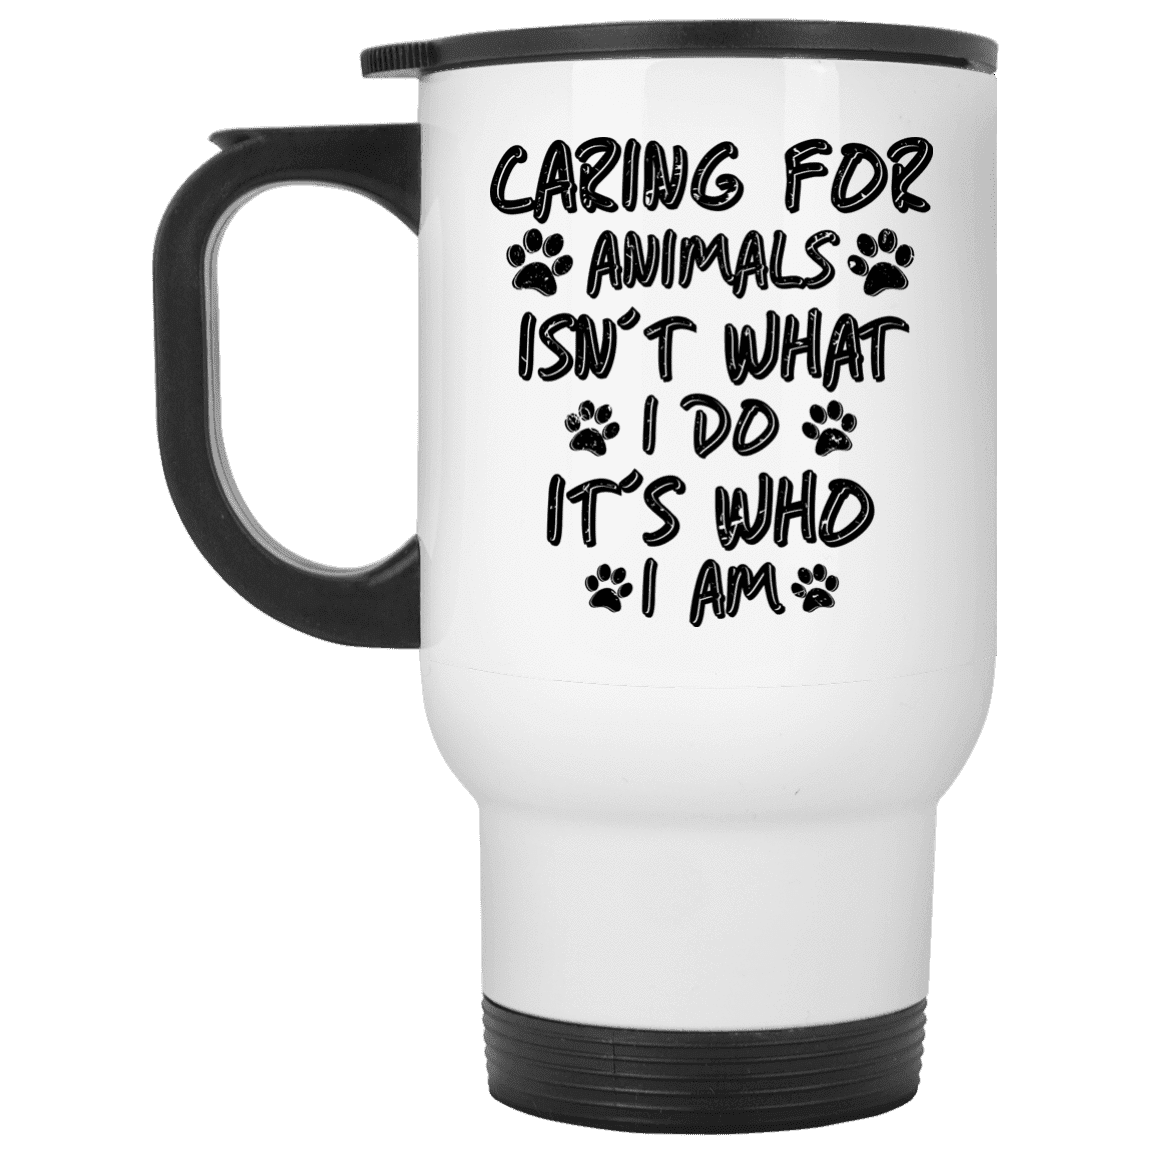 Caring For Animals - Mugs.